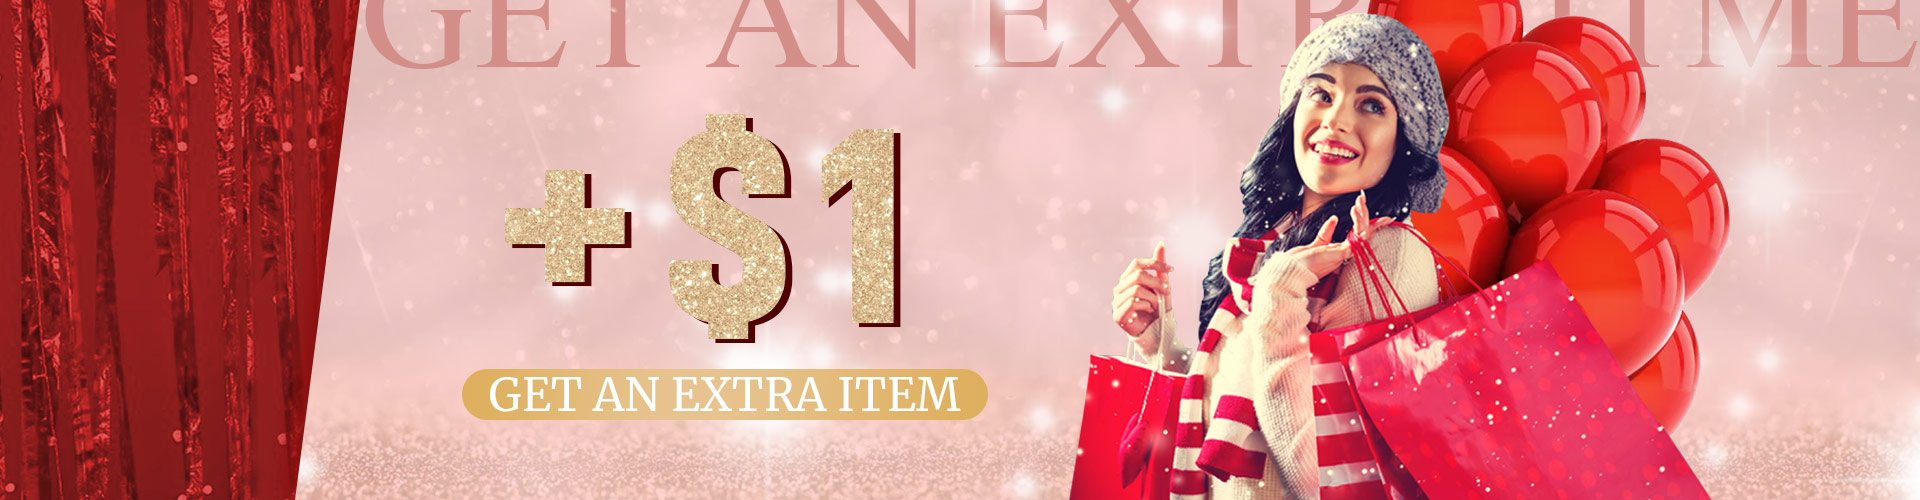 Get an Extra Item for $1